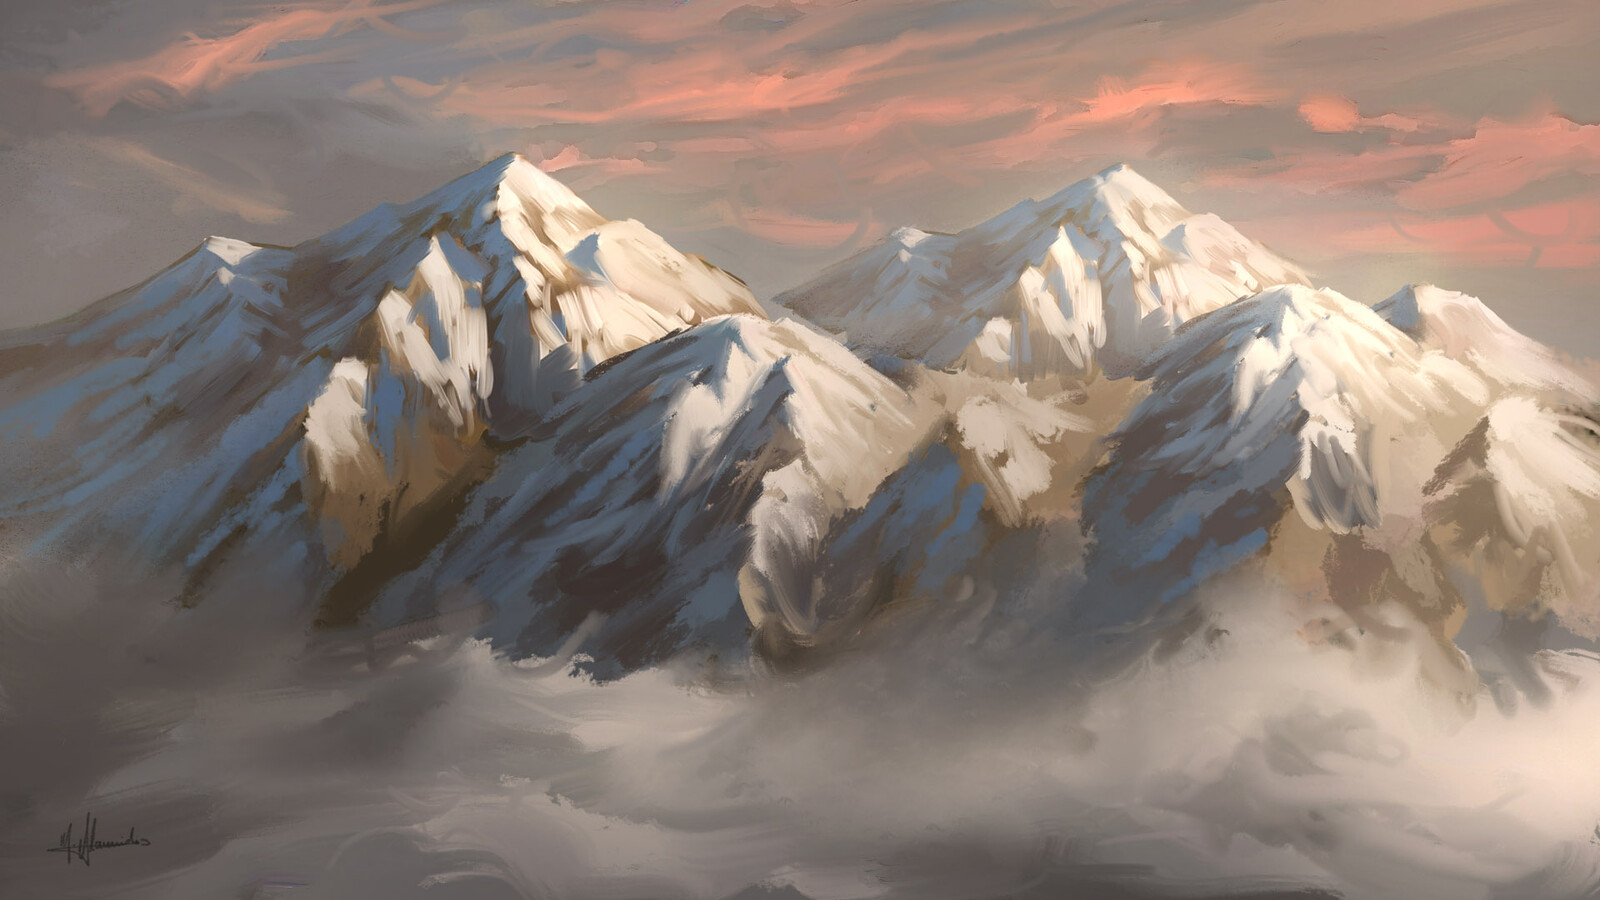 Digital Landscape Painting - Icy Mountains